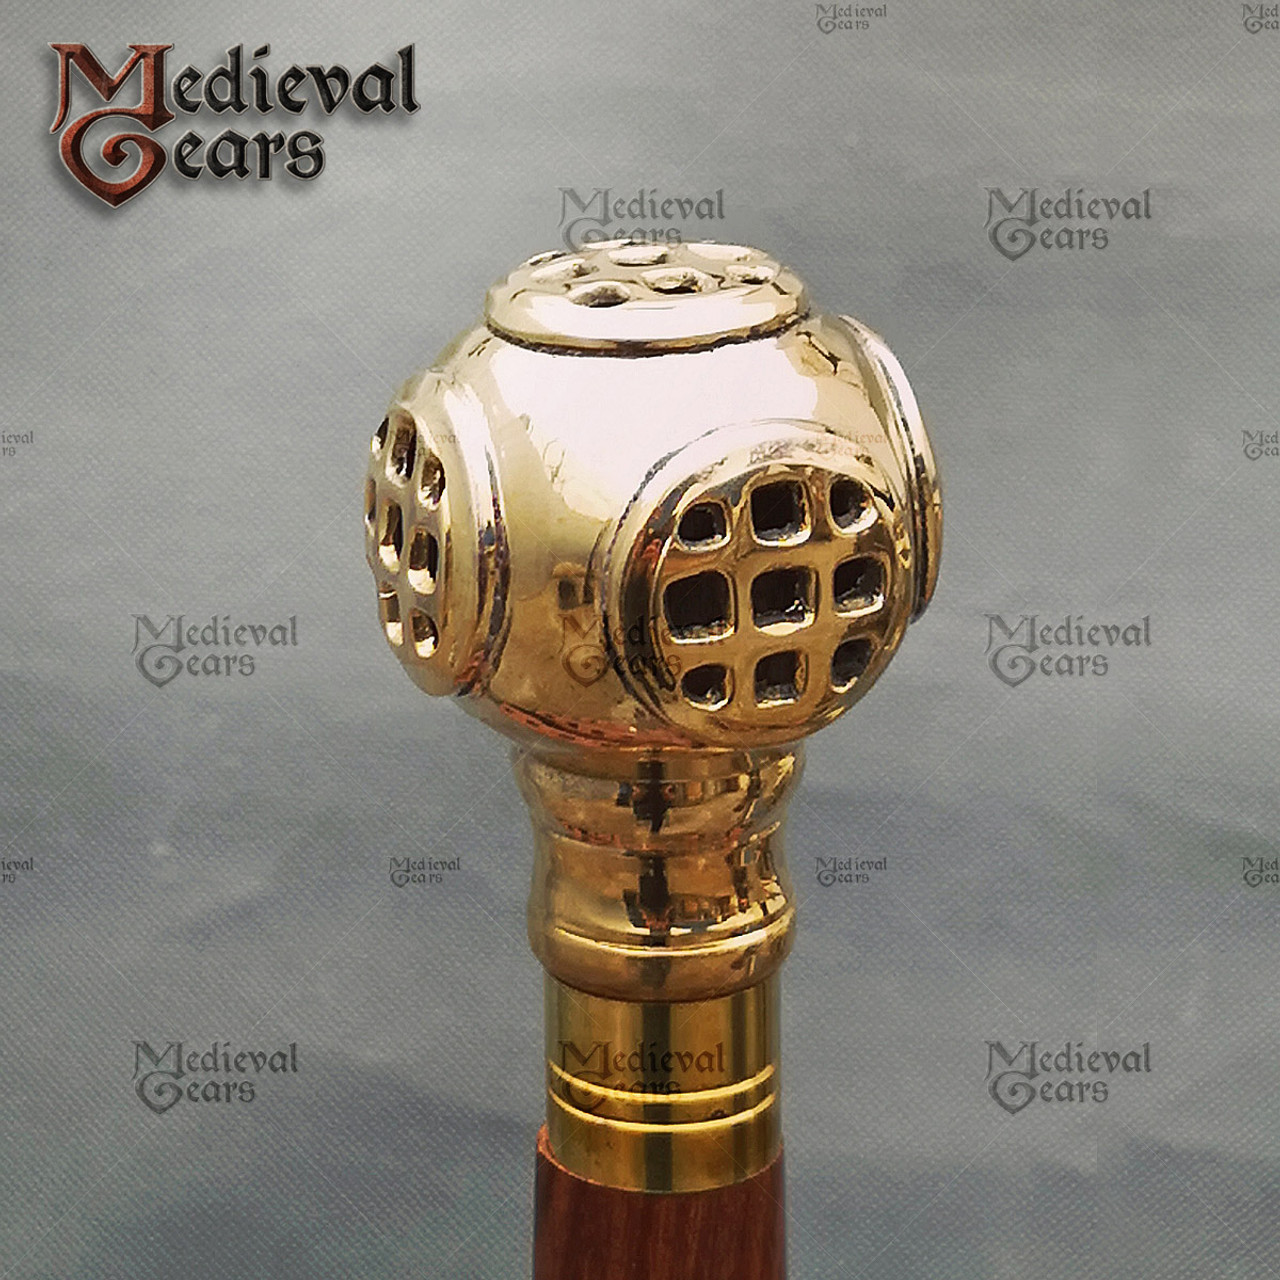 Unusual Walking Stick Comfortable Brass Handle, Inspired by Nature